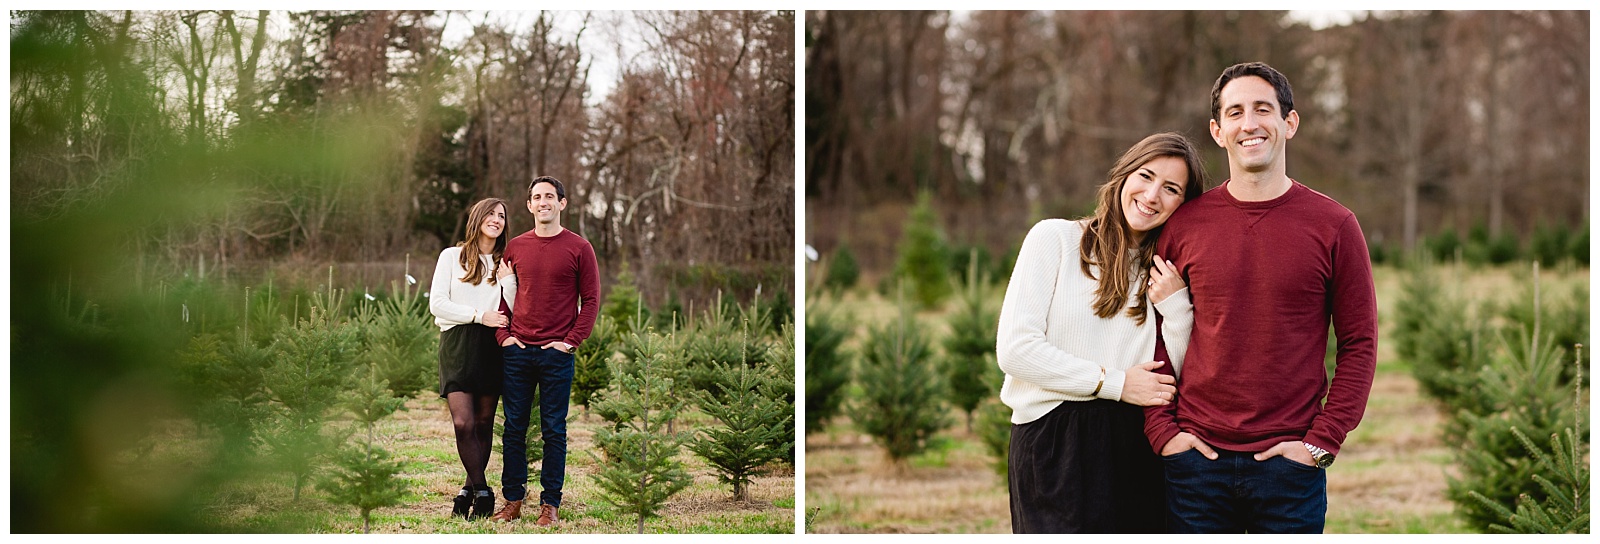 mendham new jersey engagement photography christmas enagegement christmas tree farm christmas tree farm engagement session engagement session ideas engagement session inspo winter engagement session